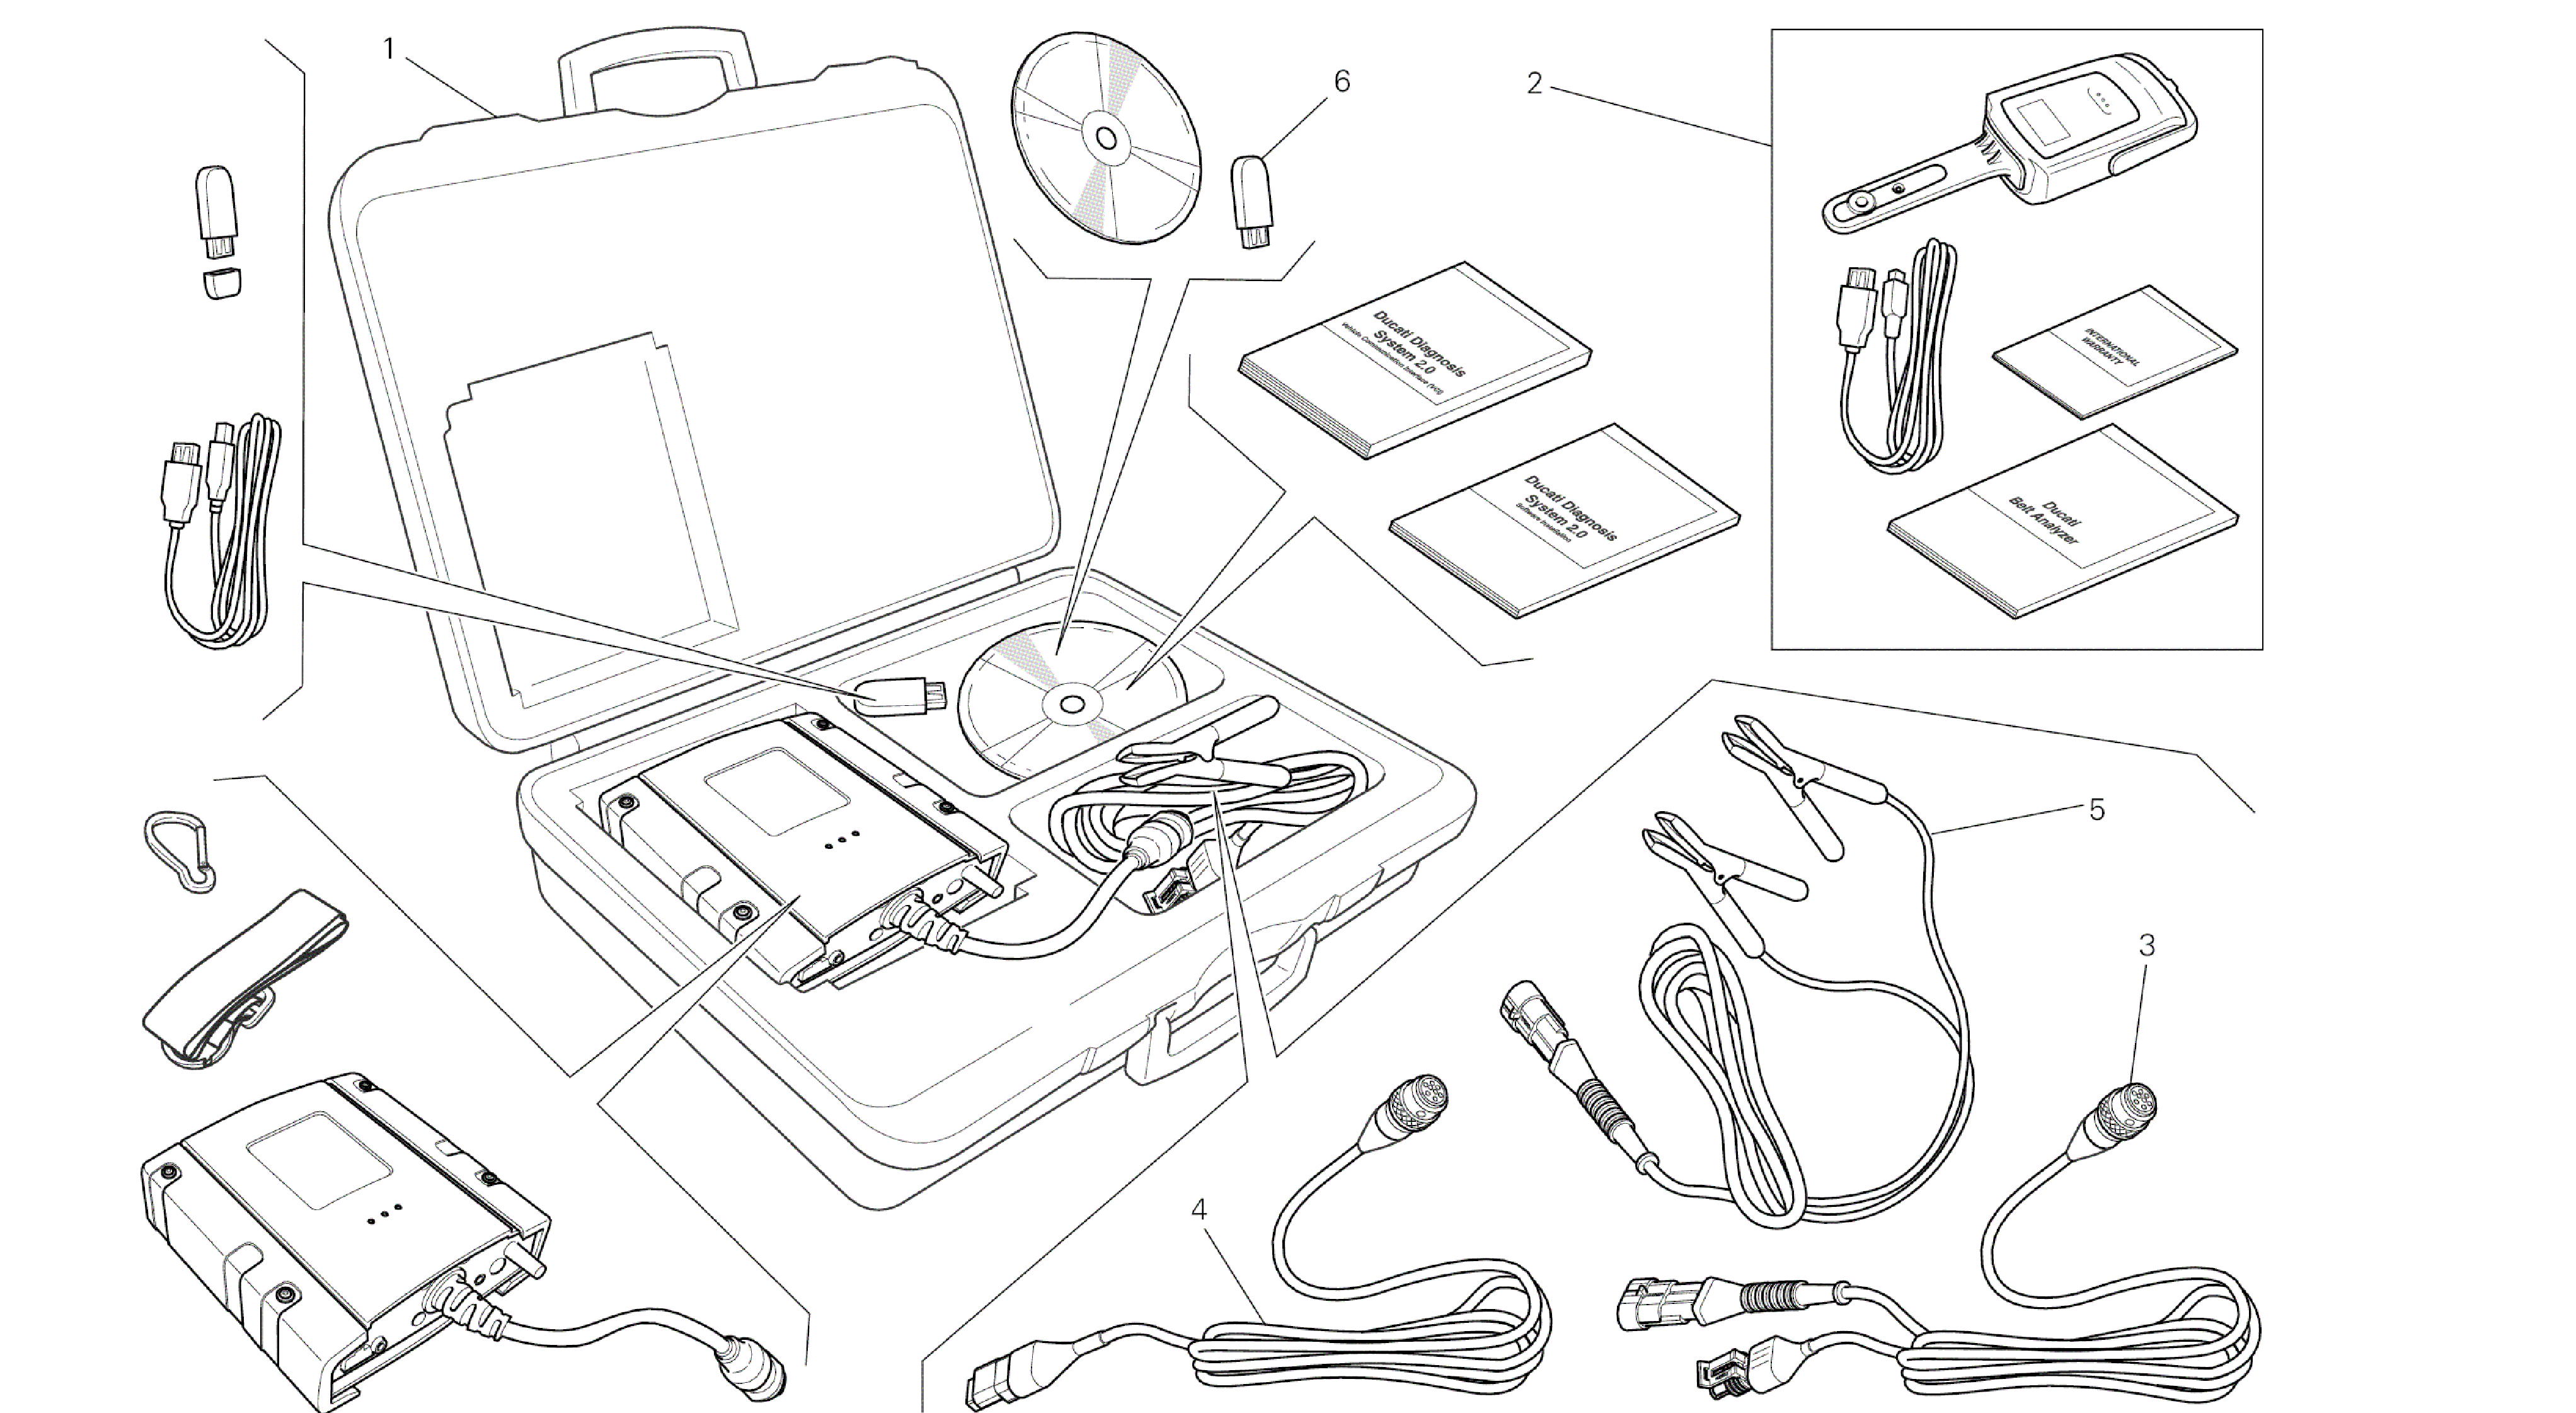 DRAWING 01B - DDS (2) TESTER [MOD:M 821]GROUP TOOLS